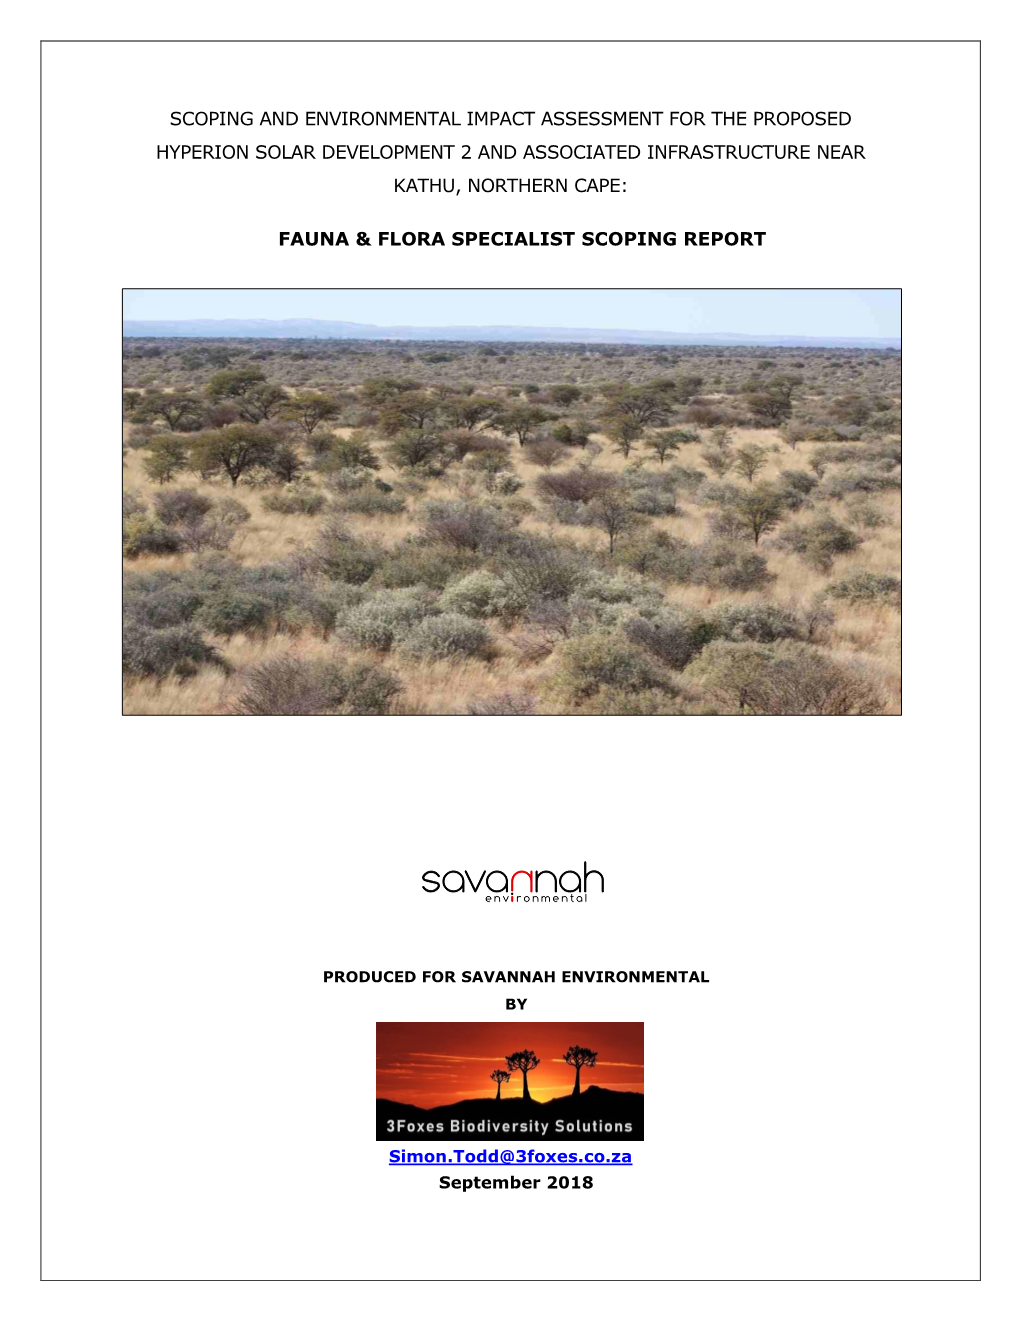 Scoping and Environmental Impact Assessment for the Proposed Hyperion Solar Development 2 and Associated Infrastructure Near Kathu, Northern Cape